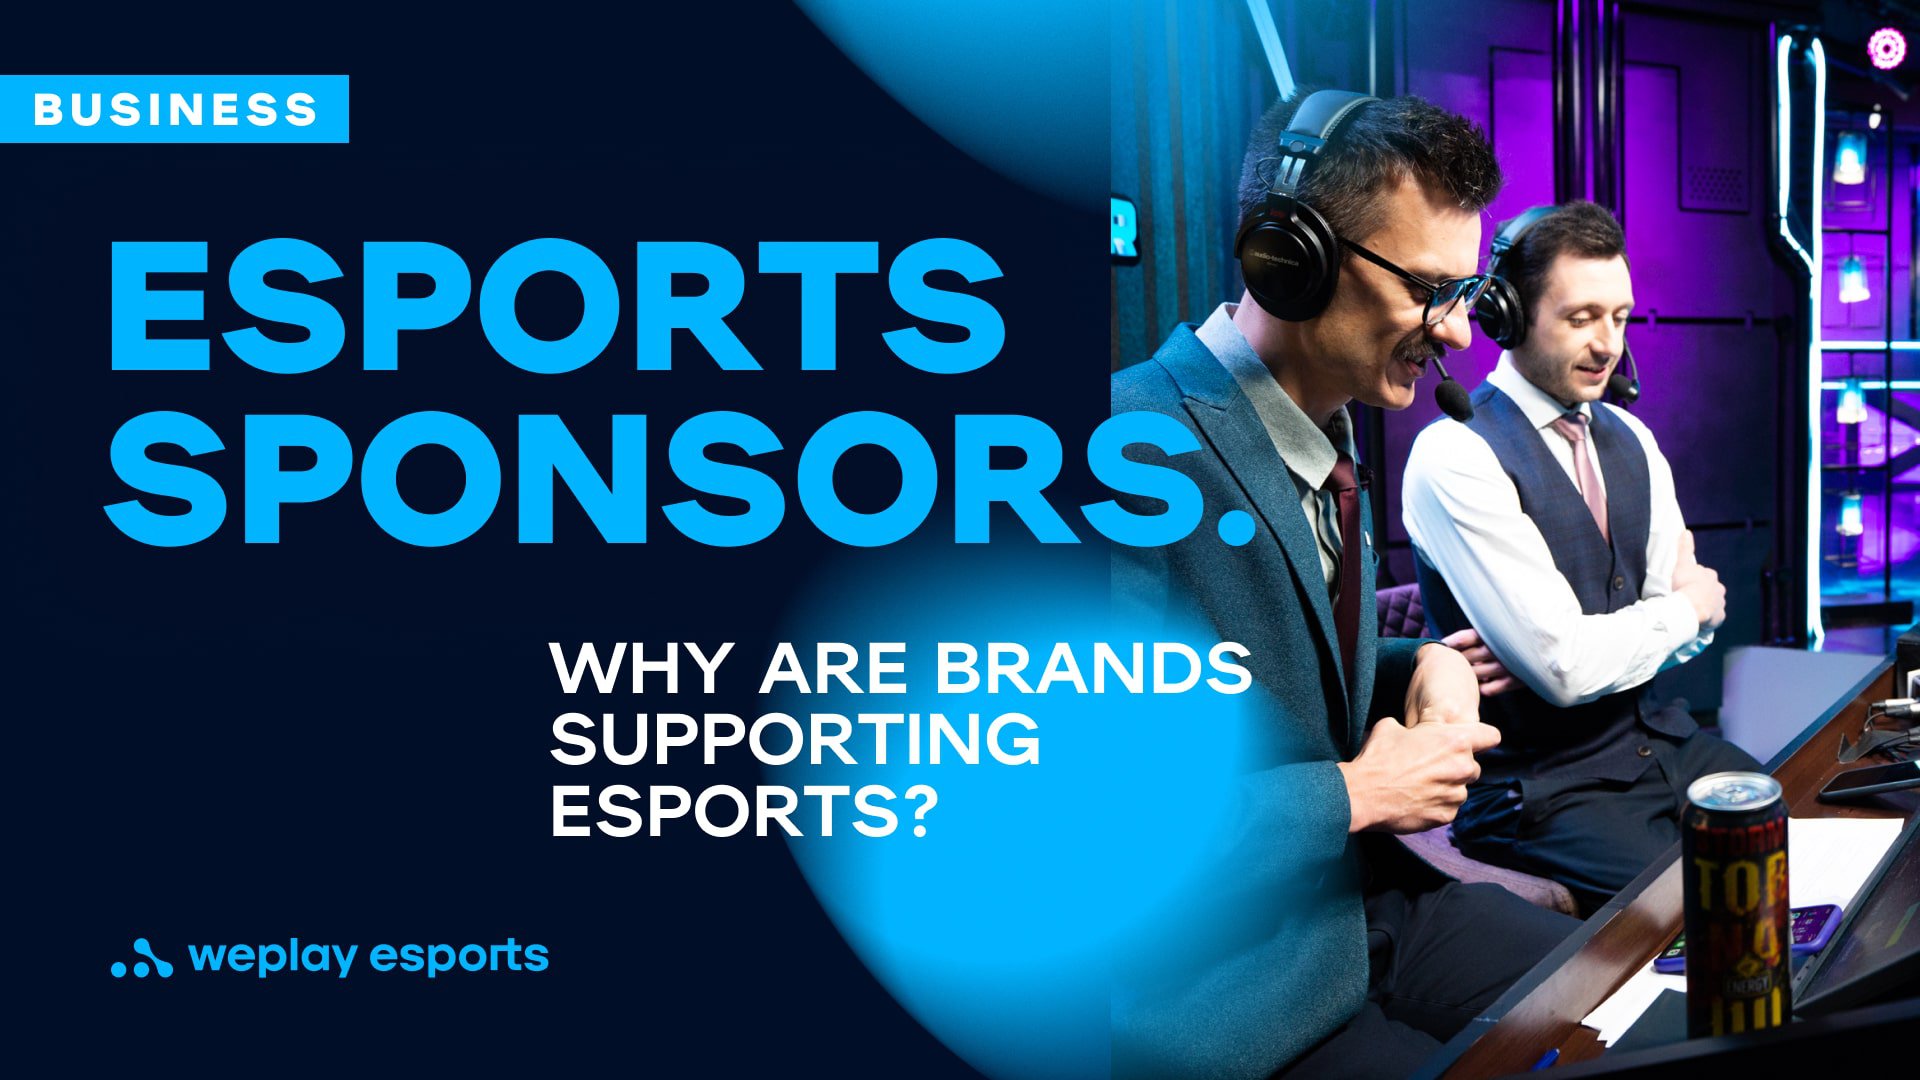 Esports sponsors. Why are brands supporting esports? Credits: WePlay Holding